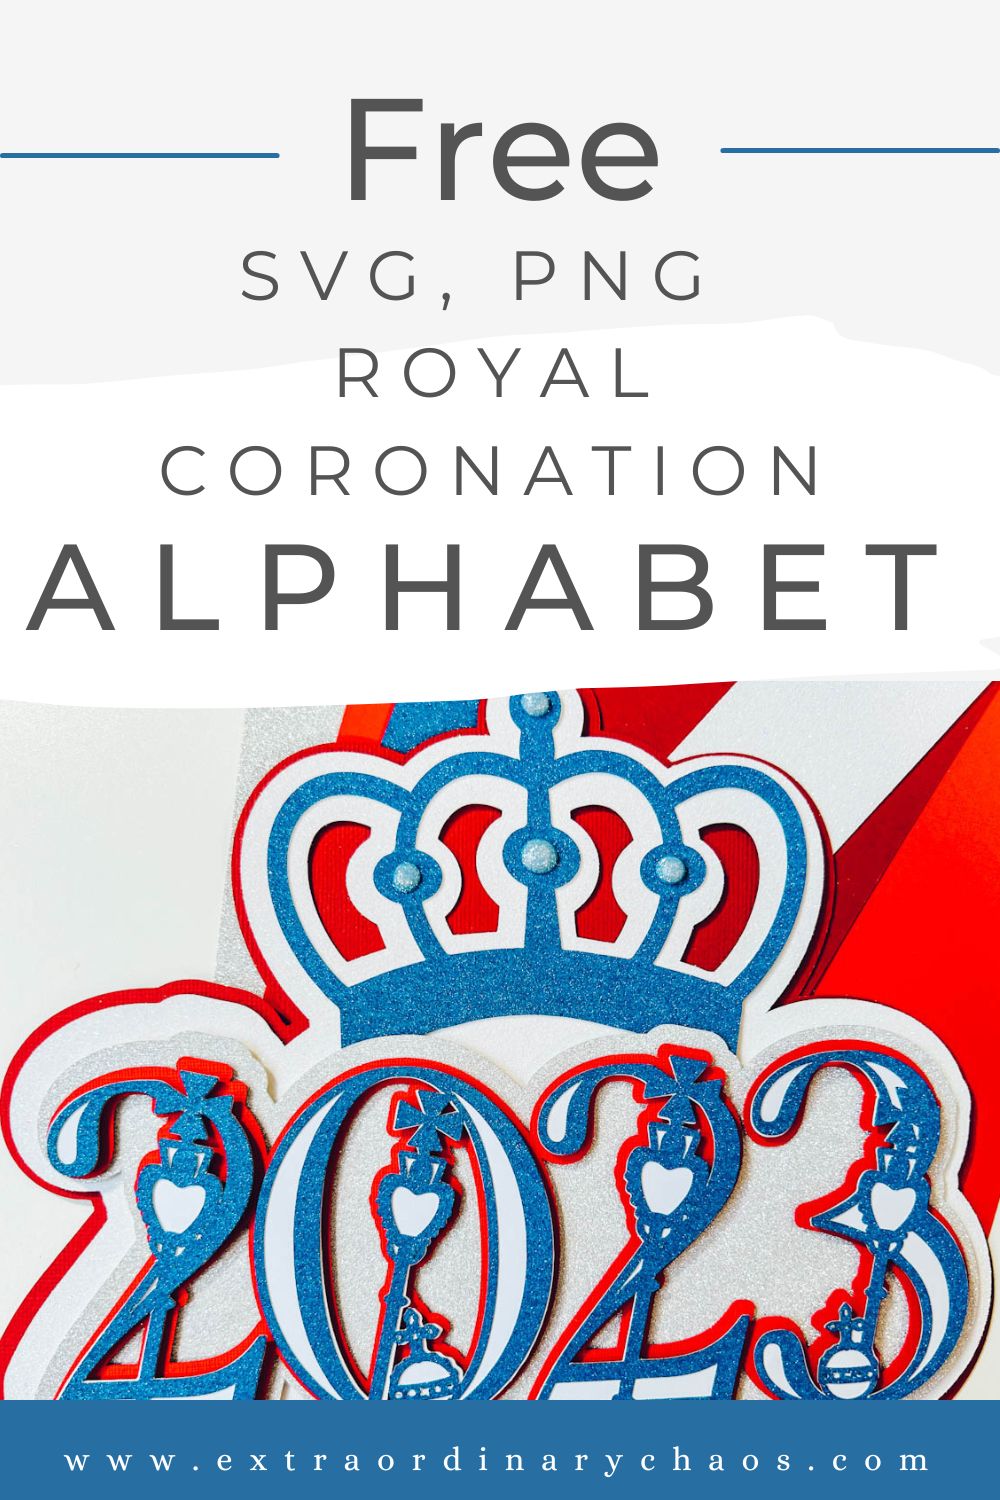 Free SVG PNG Royal Coronation Alphabet Letters and Numbers for Royal Coronation decorations and crafts and scrapbooking with Cricut, Silhouette, xTool and Glowforge